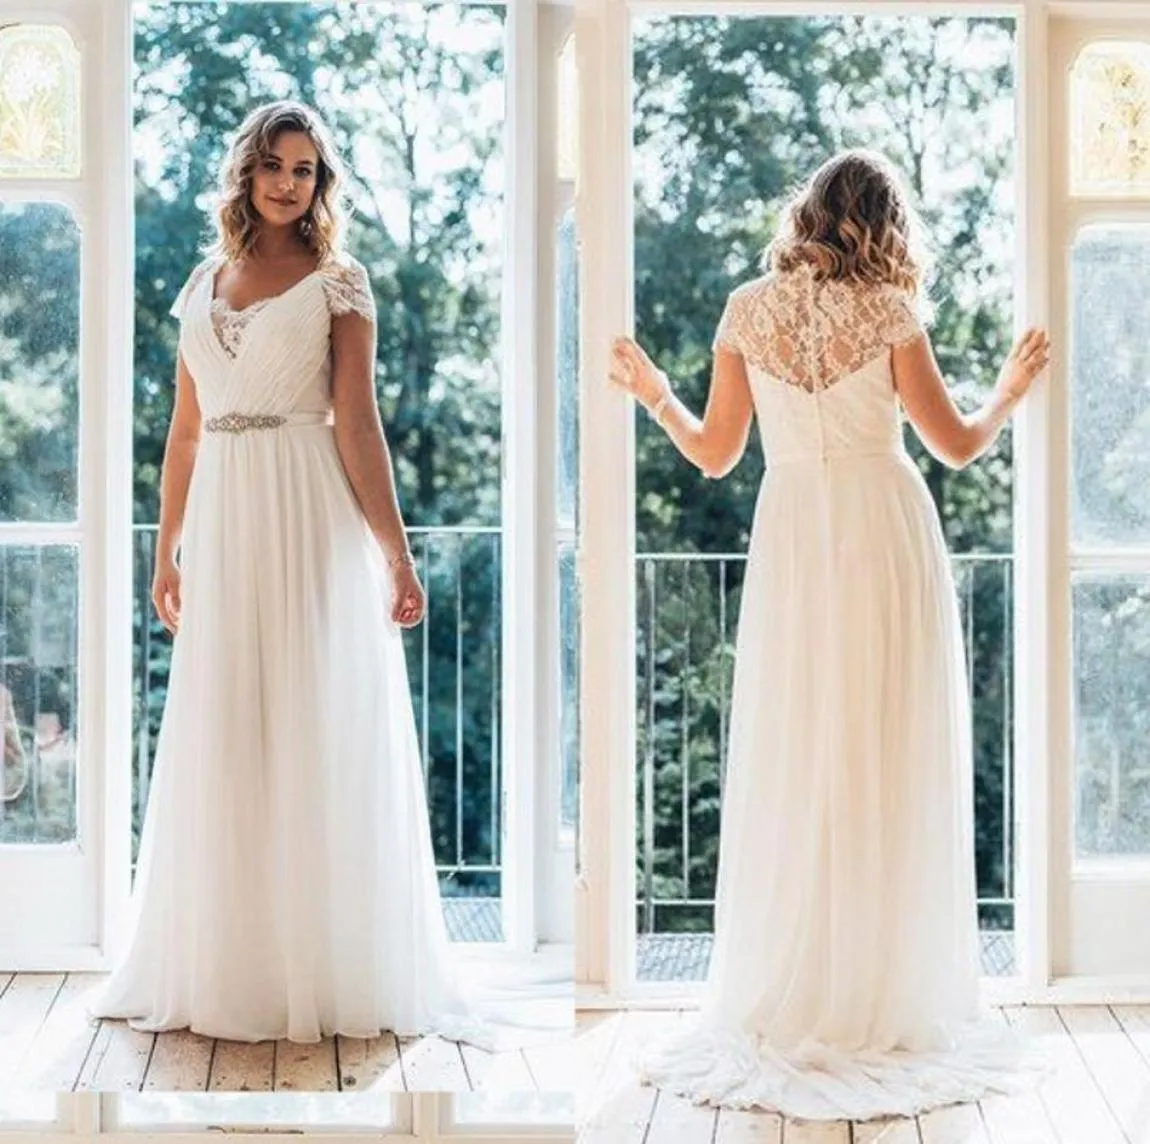 2022 Elegant Cheap Wedding Dresses Plus size V neck With Short Sleeves Applique Ribbon with Crystal Beaded Chiffon Hollow Back lac2491597